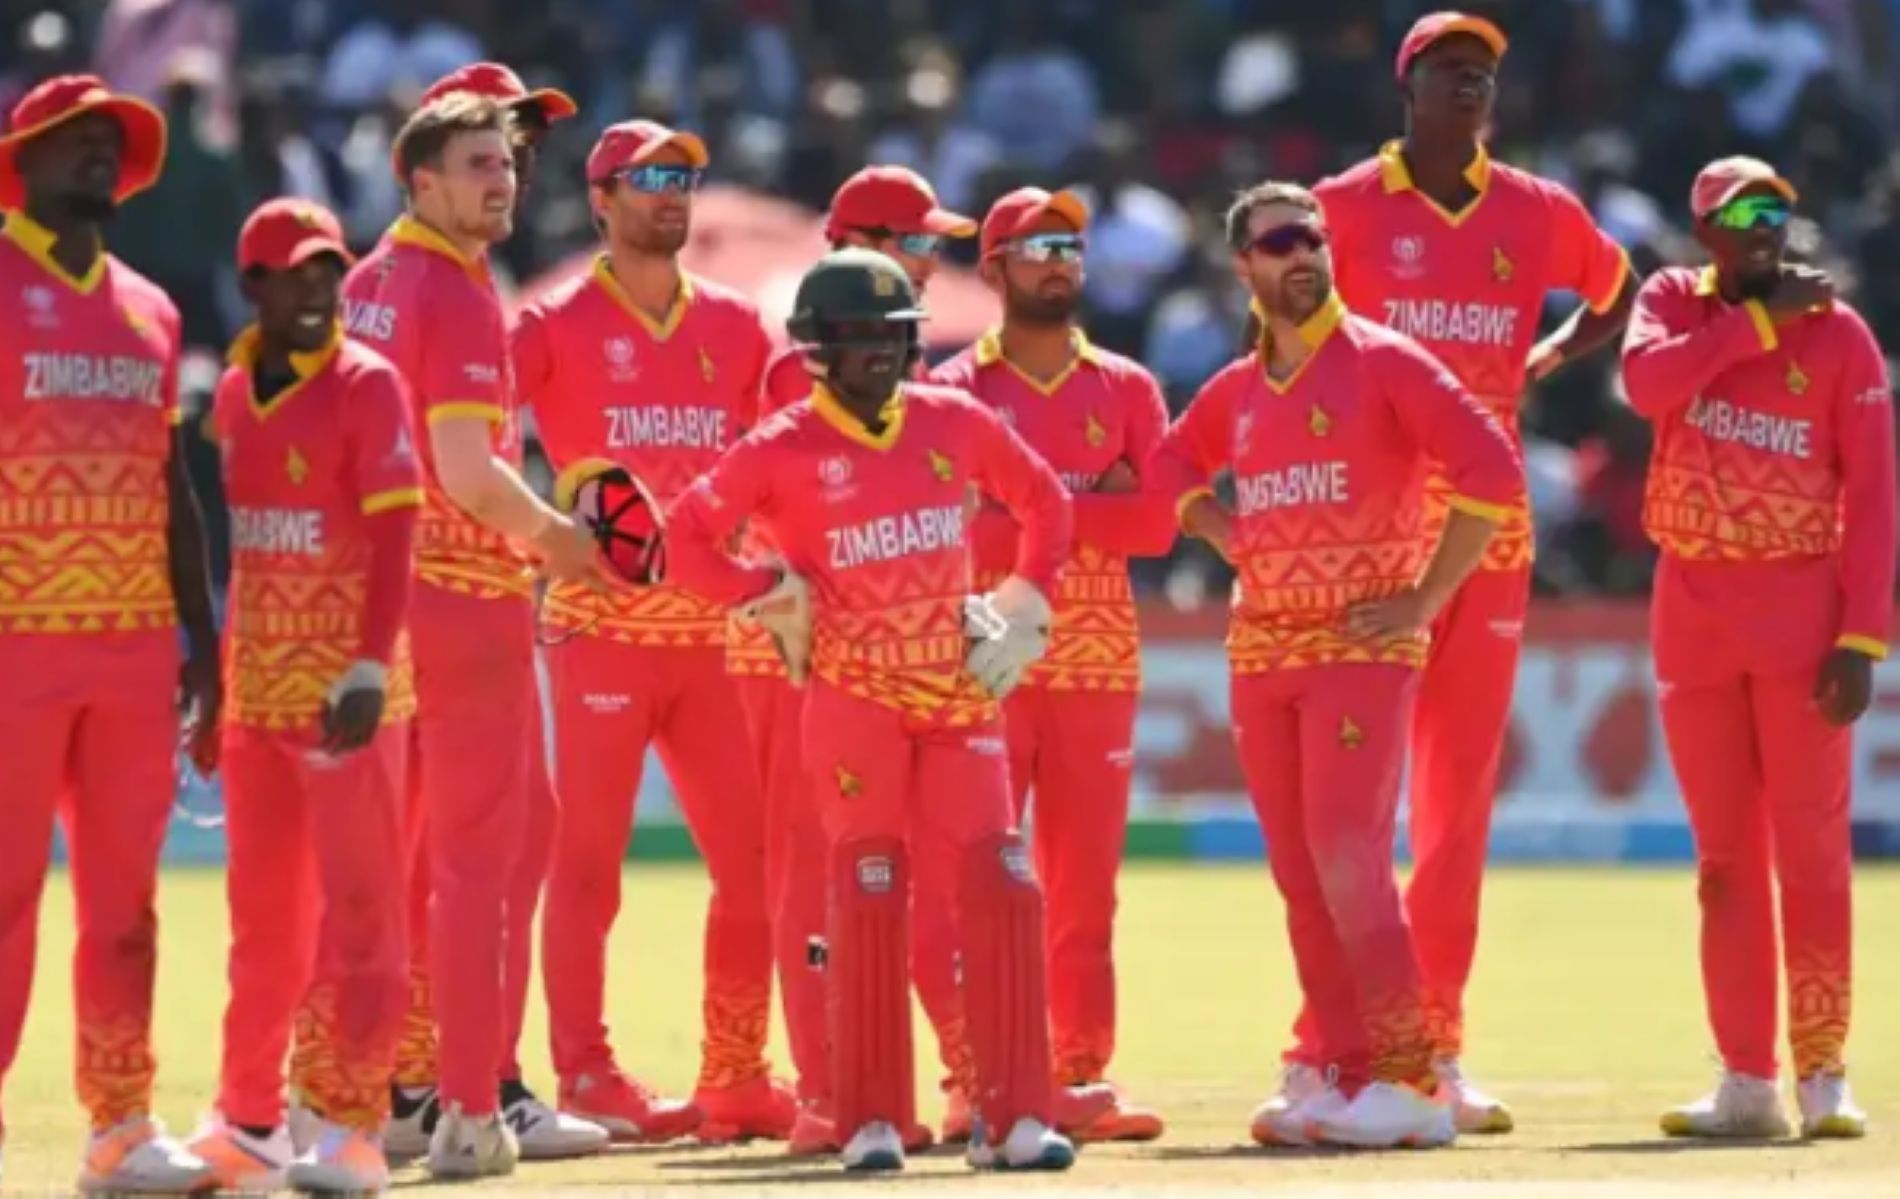 Zimbabwe suffered their second loss in three games